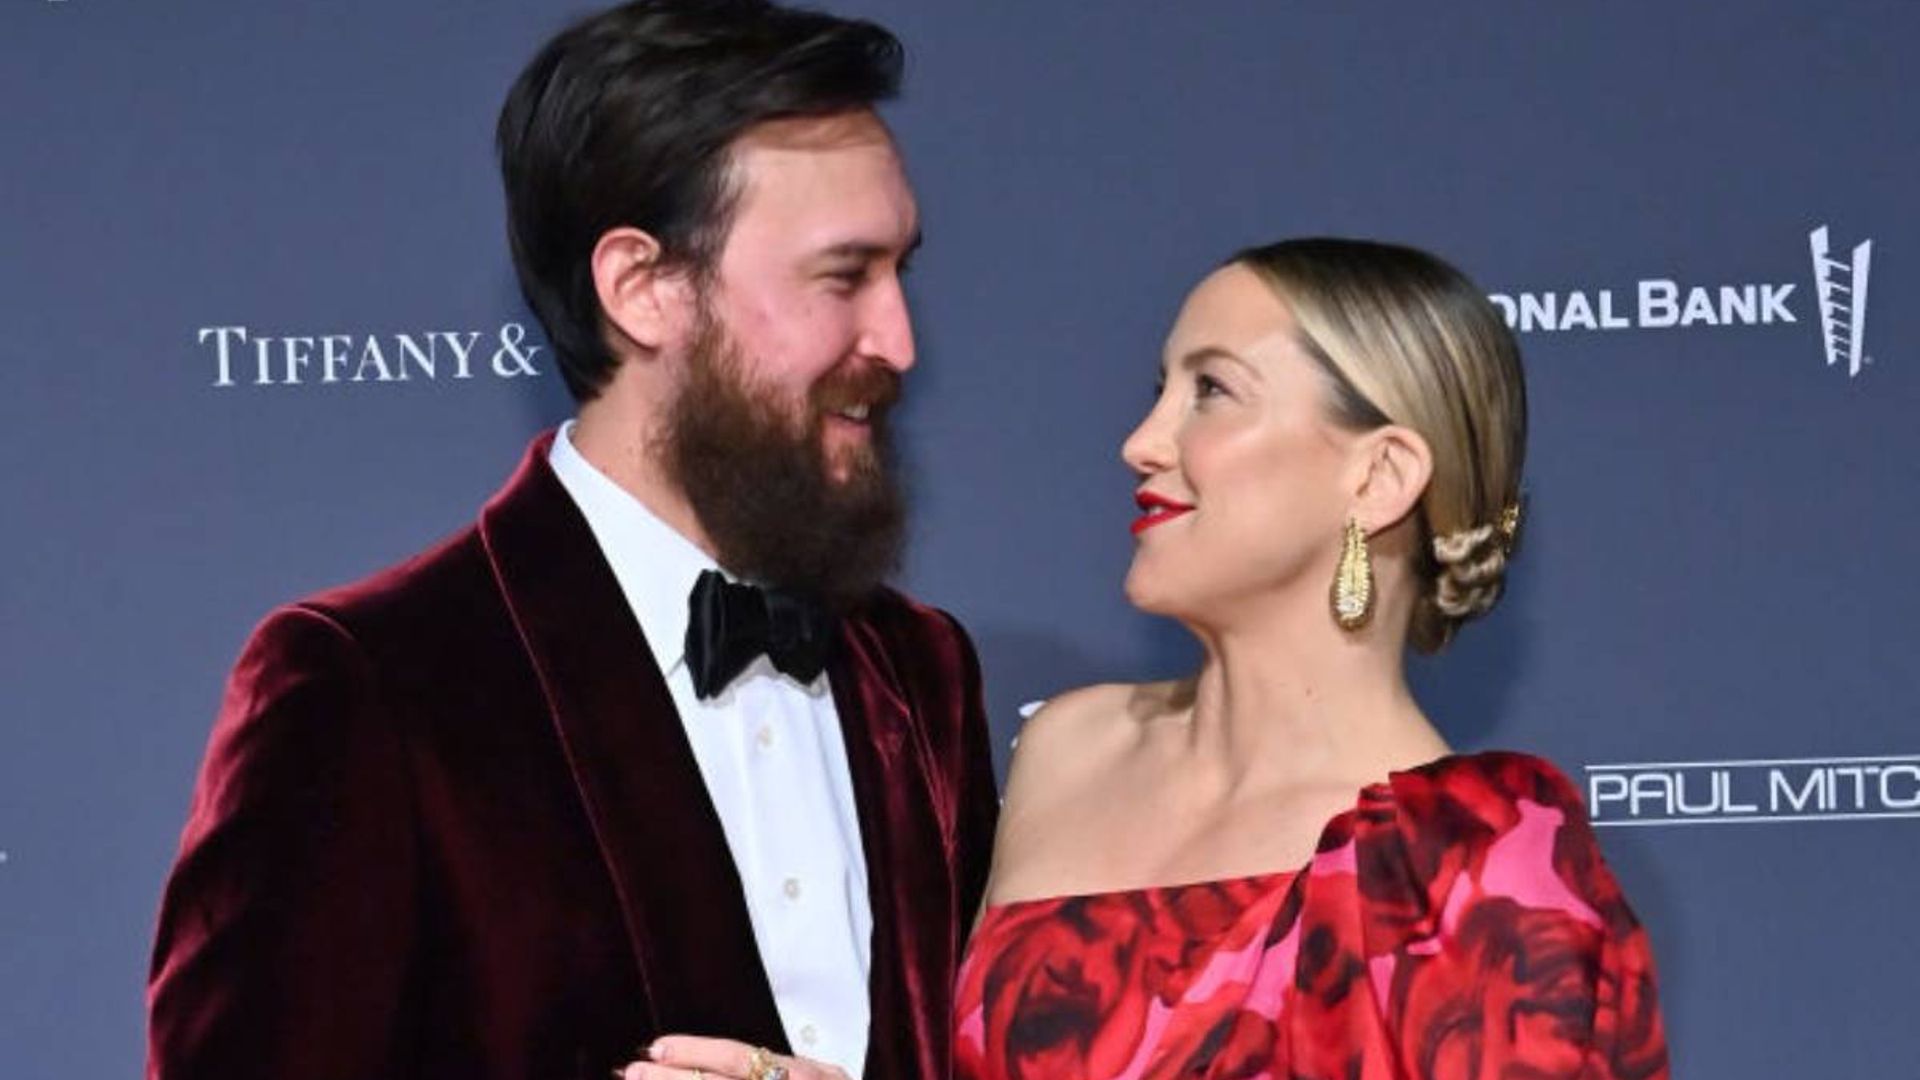 Kate Hudson celebrates incredibly family news with adorable baby bump photo